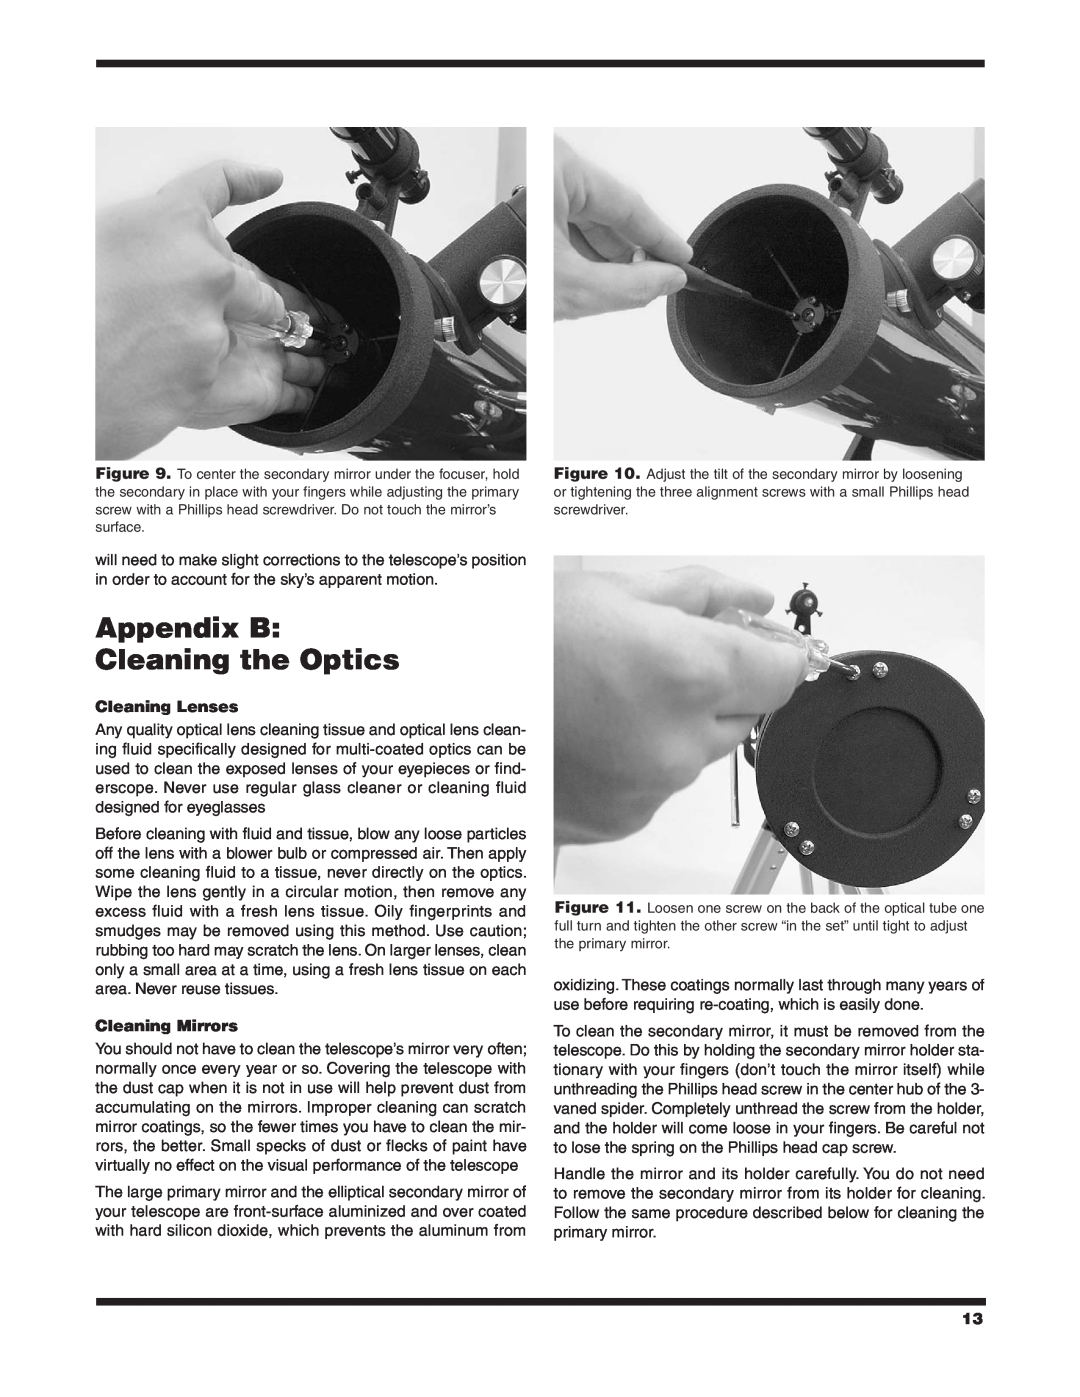 Orion 9843 instruction manual Appendix B Cleaning the Optics, Cleaning Lenses, Cleaning Mirrors 